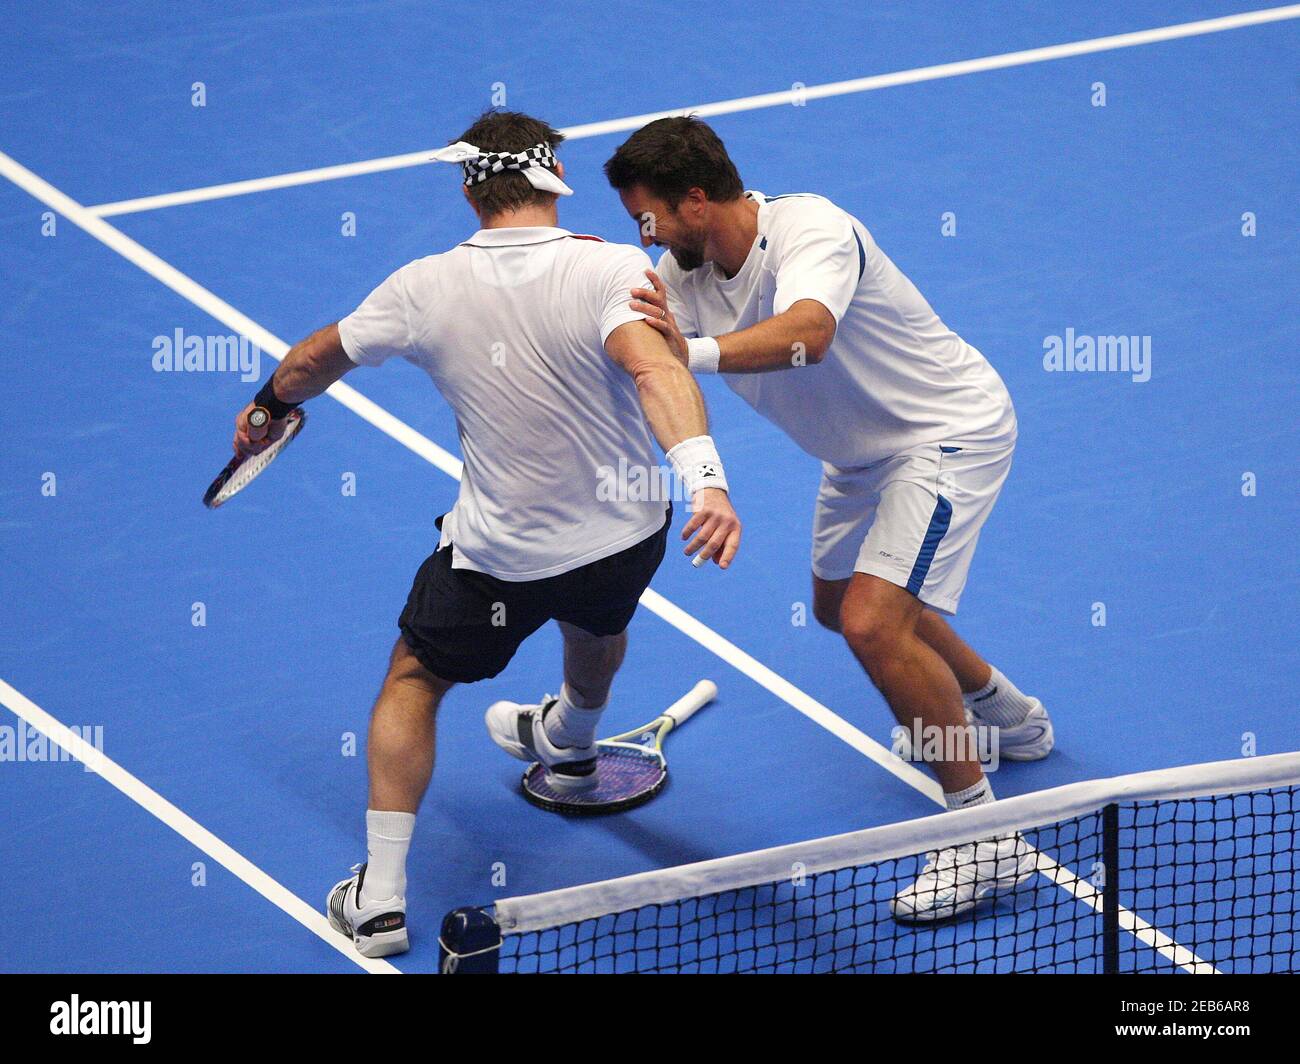 Tennis - AEGON Masters - Royal Albert Hall, London - 4/12/09 Australia's  Pat Cash (L) and Pat Rafter (R) during their group stage Mandatory Credit:  Action Images / Matthew Childs Livepic Stock Photo - Alamy